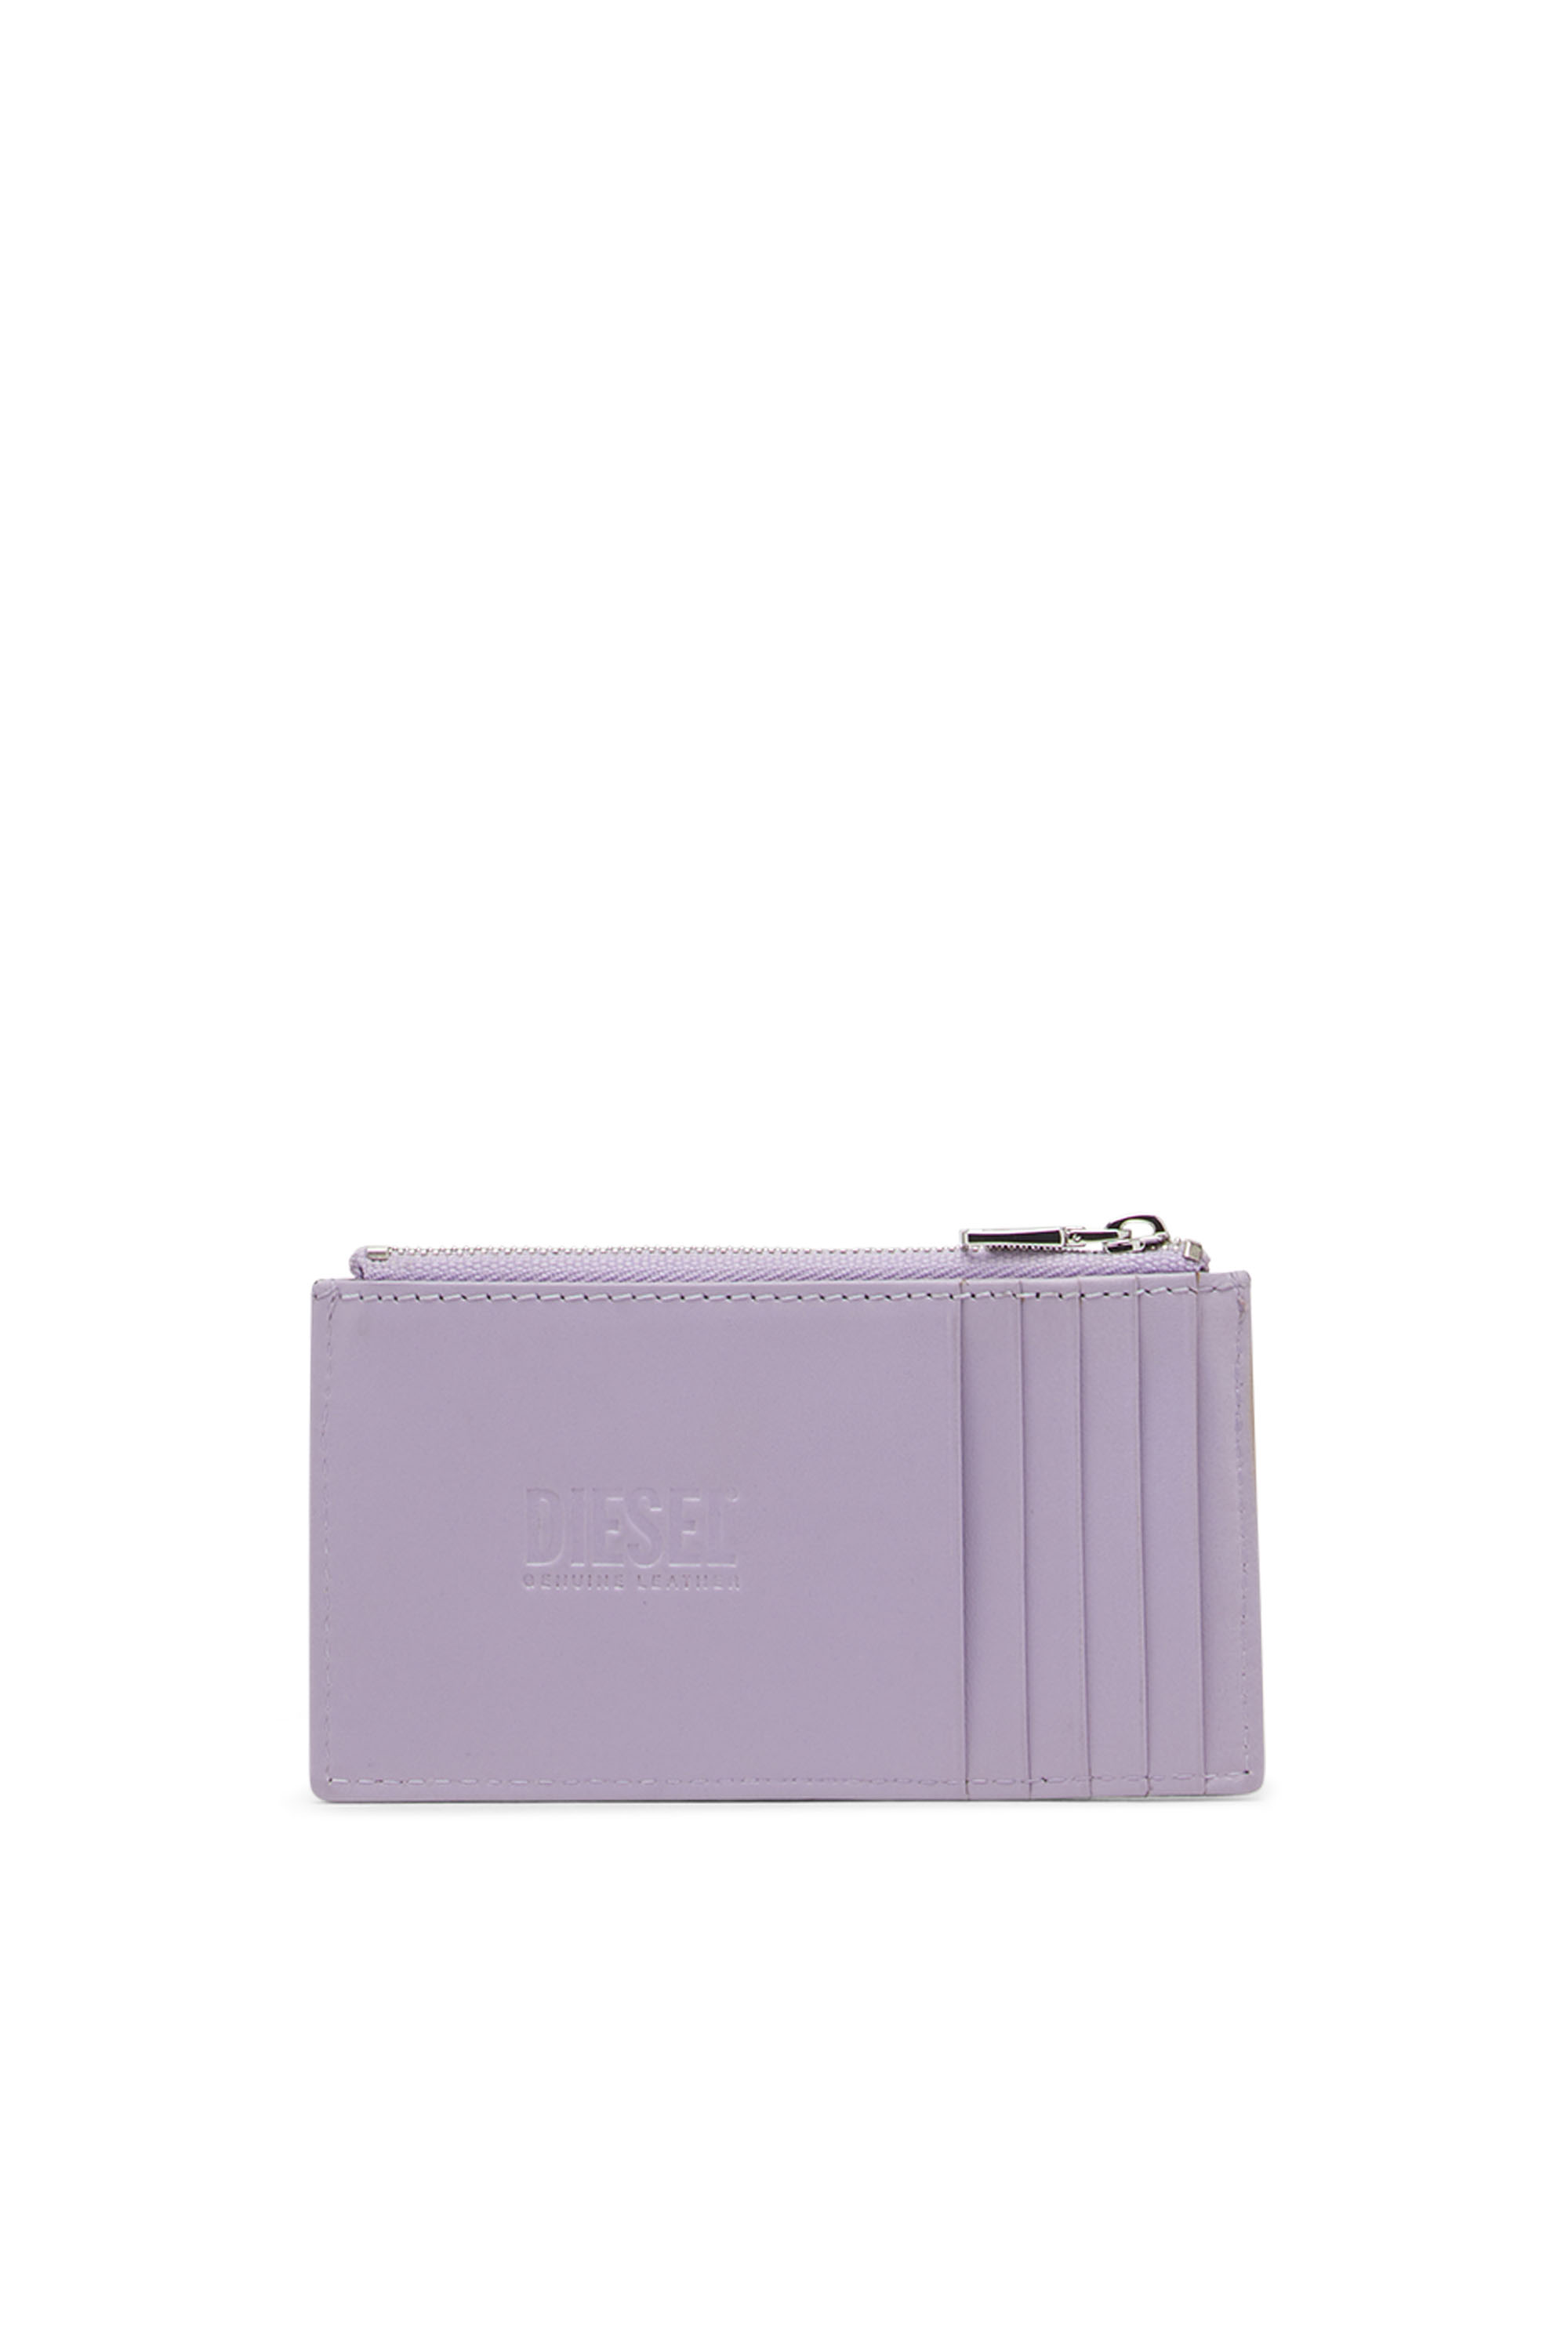 Diesel - PAOULINA, Lilac - Image 2